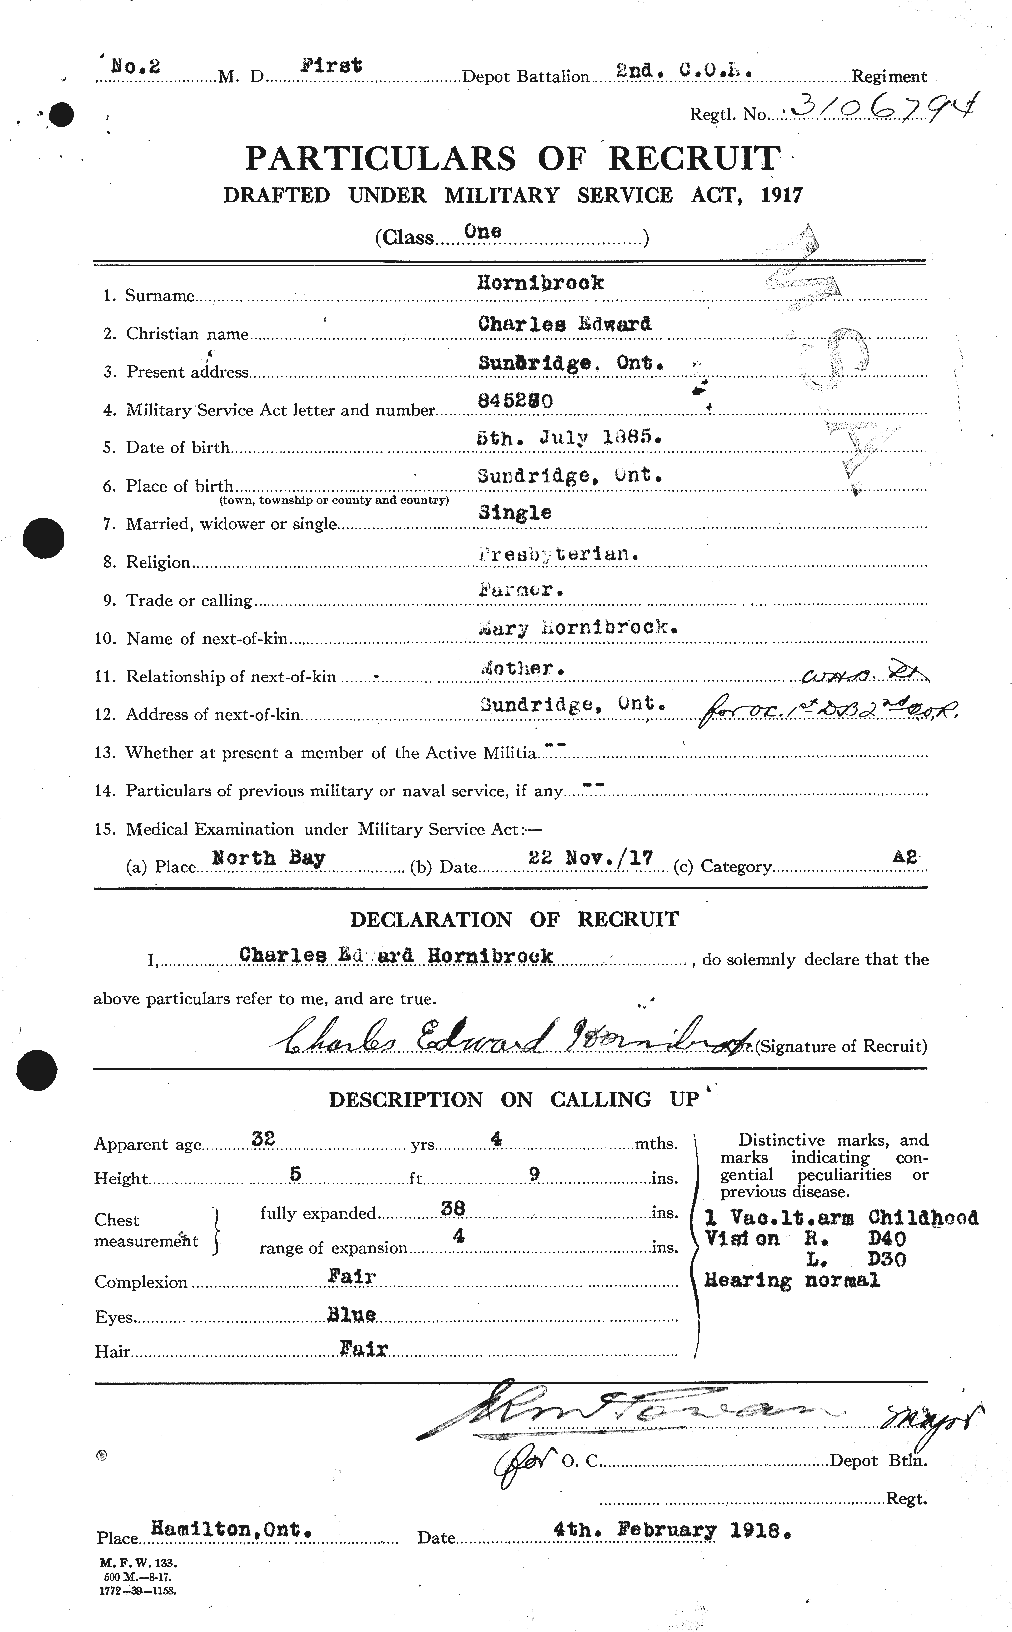 Personnel Records of the First World War - CEF 400799a